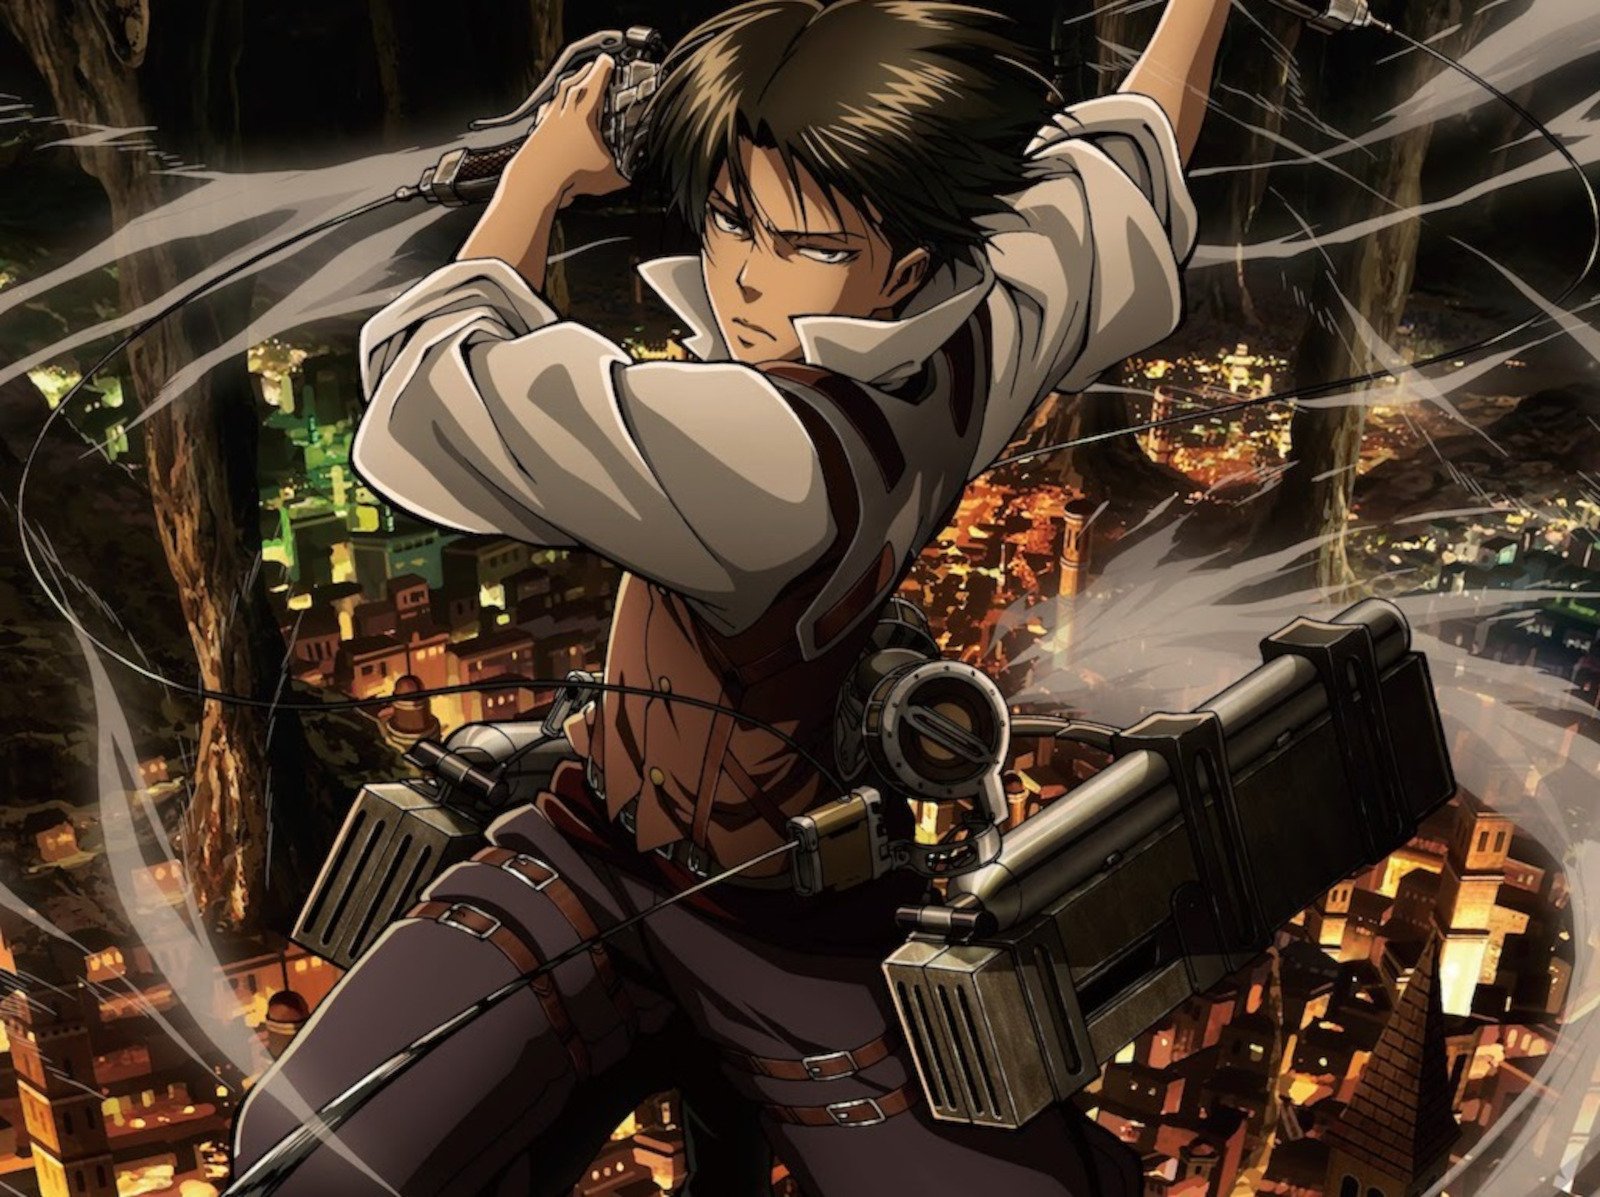 Attack on Titan' Final Episodes: Everything to Know About the Anime